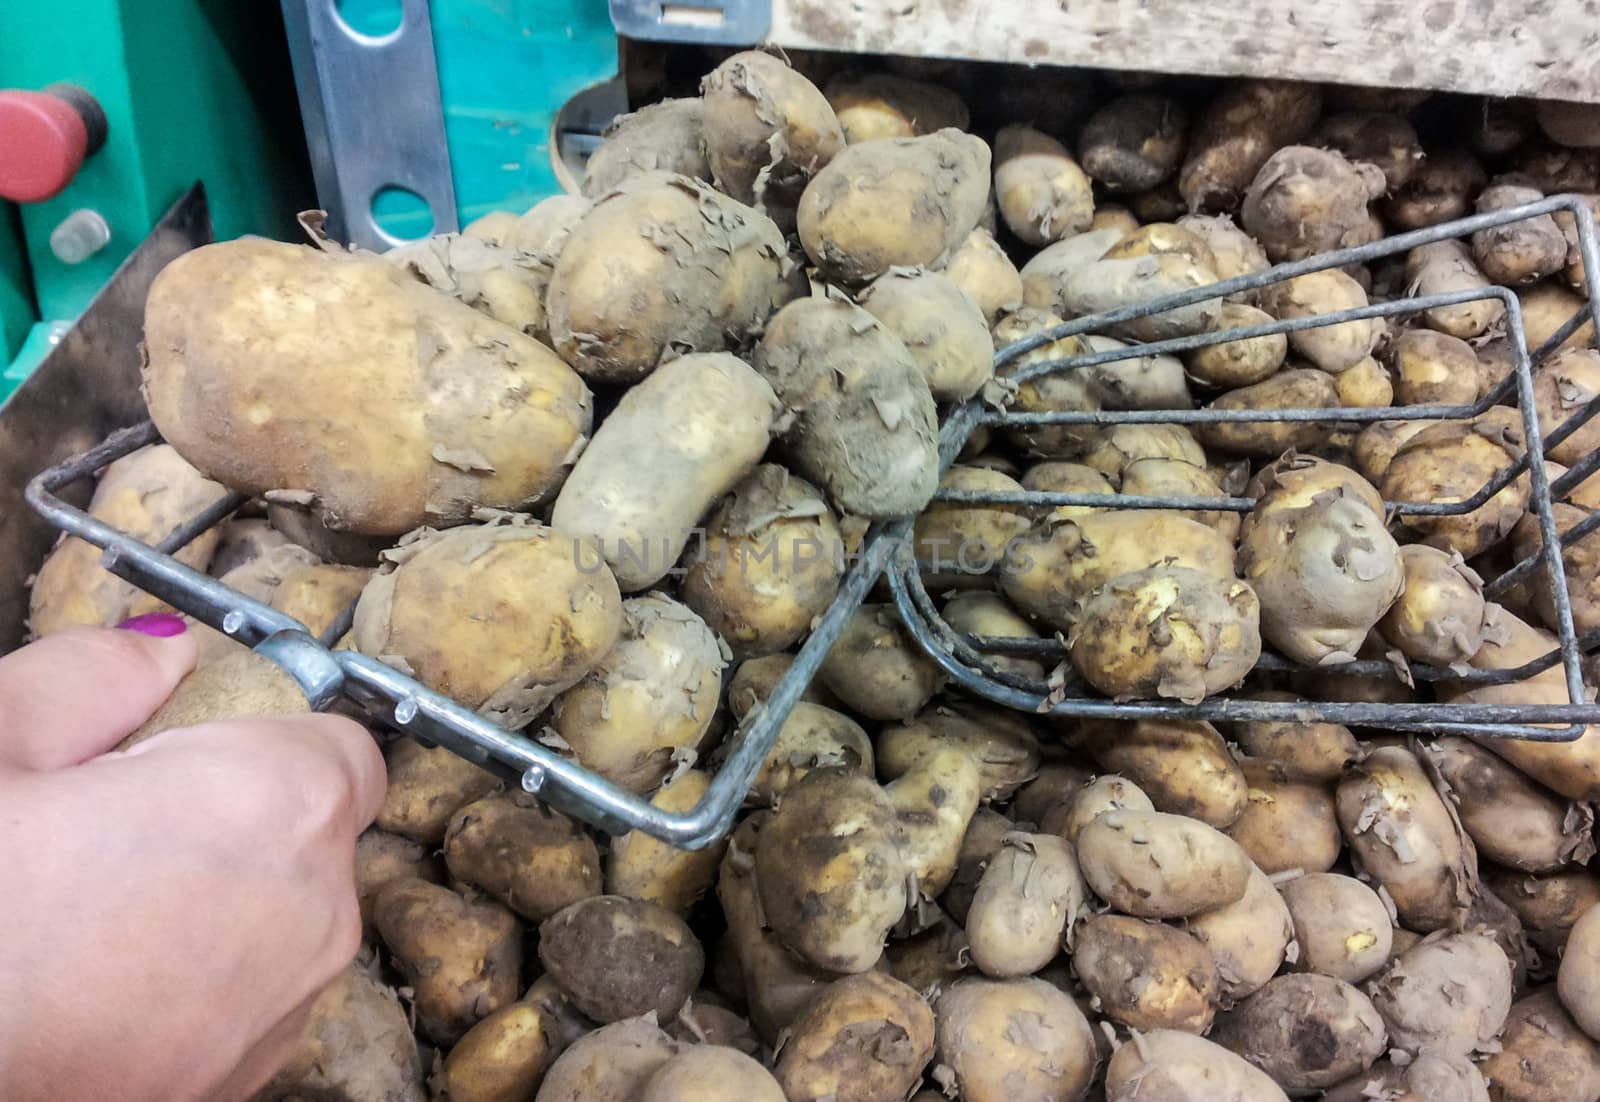 Person picking raw potatoes at marketplace with a metal shovel